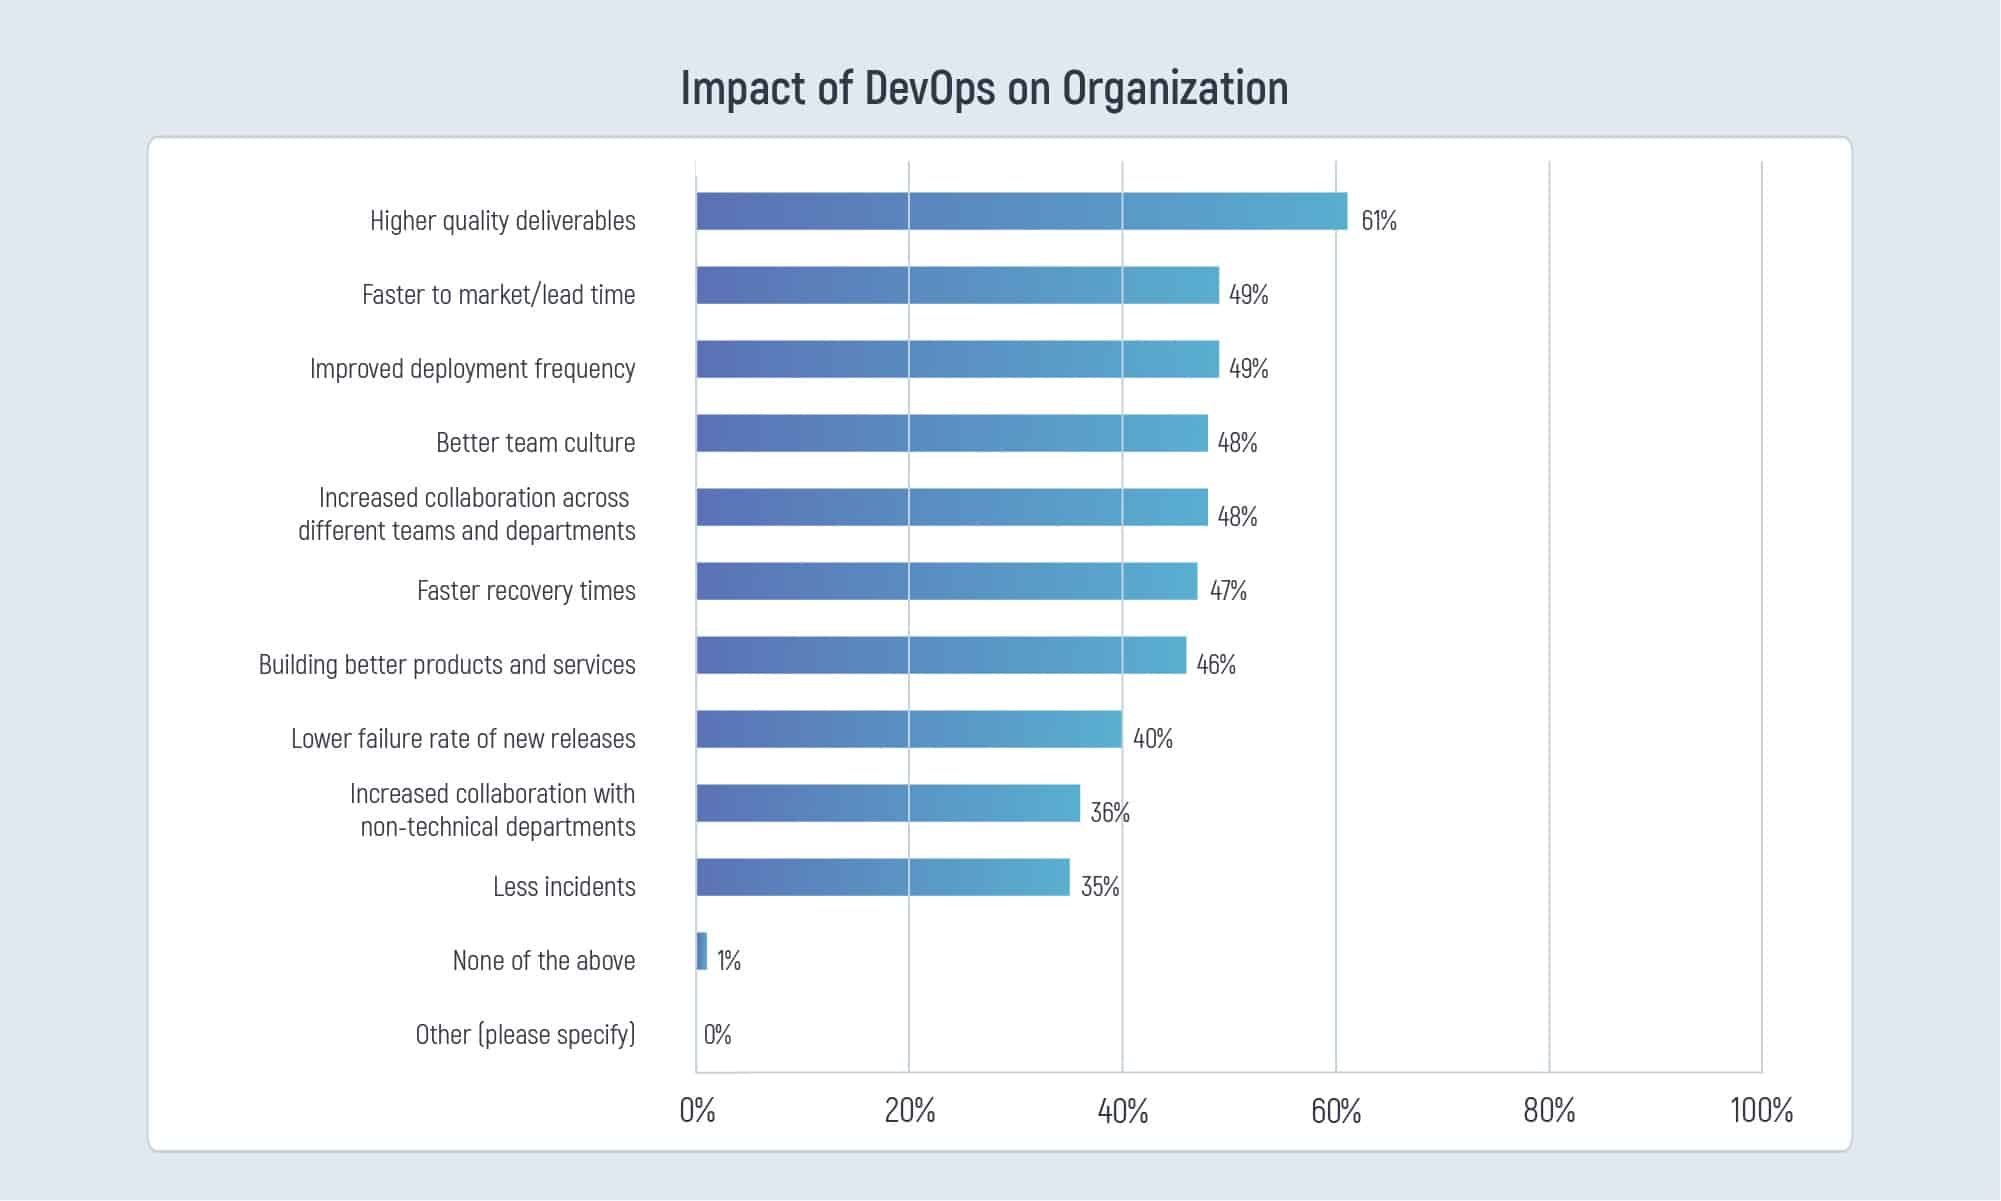 A bar chart of the impact of DevOps on Organization